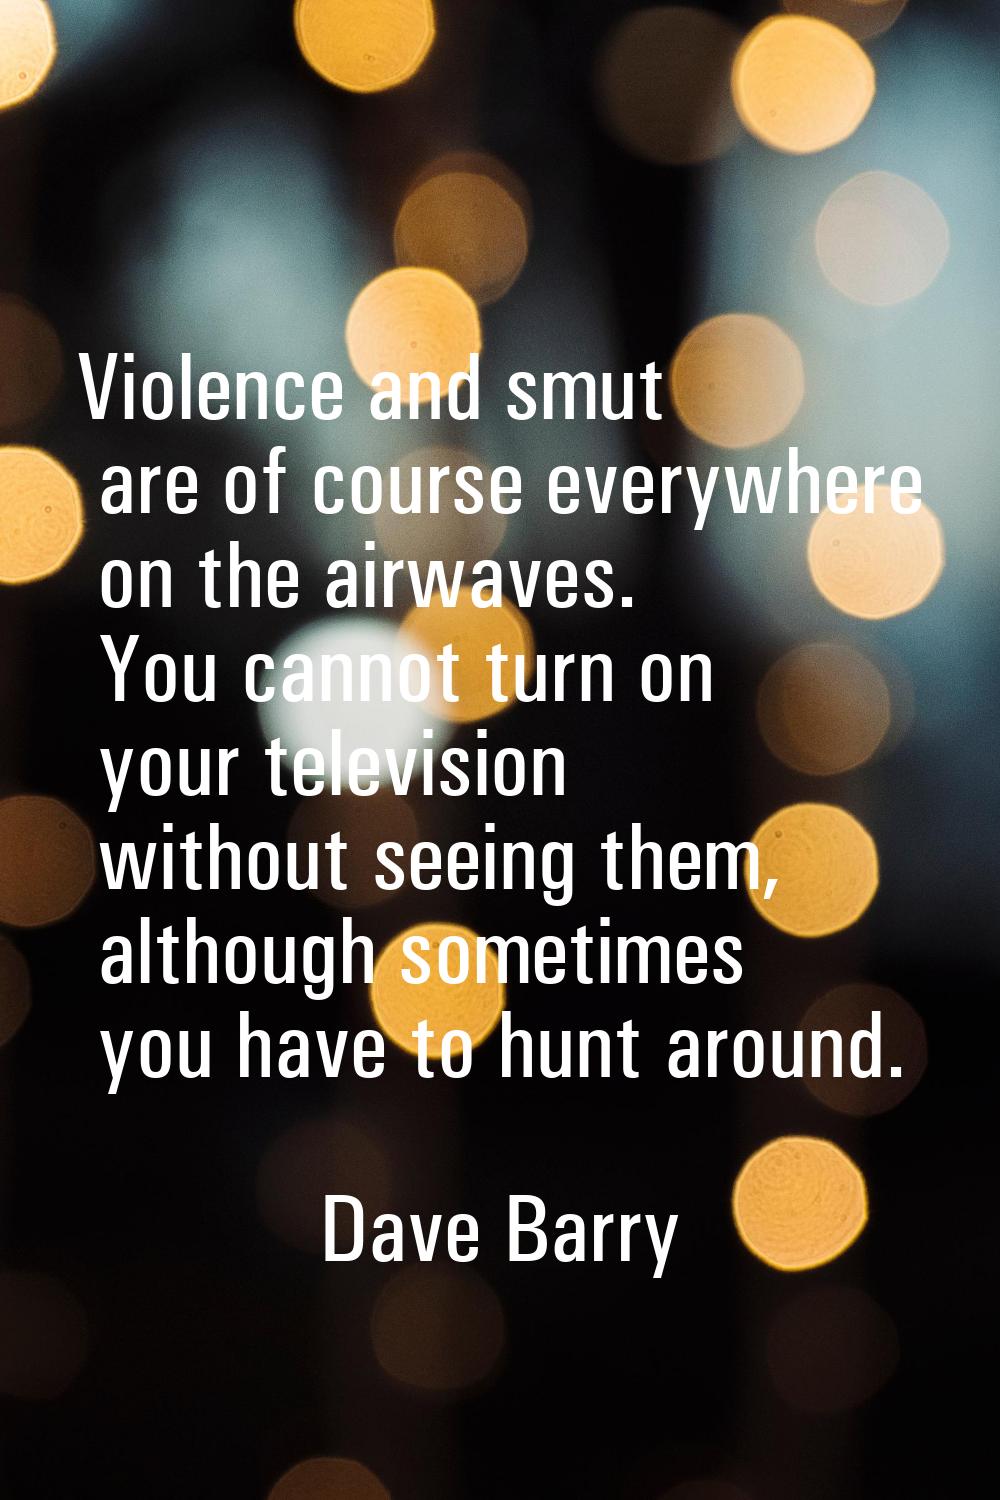 Violence and smut are of course everywhere on the airwaves. You cannot turn on your television with